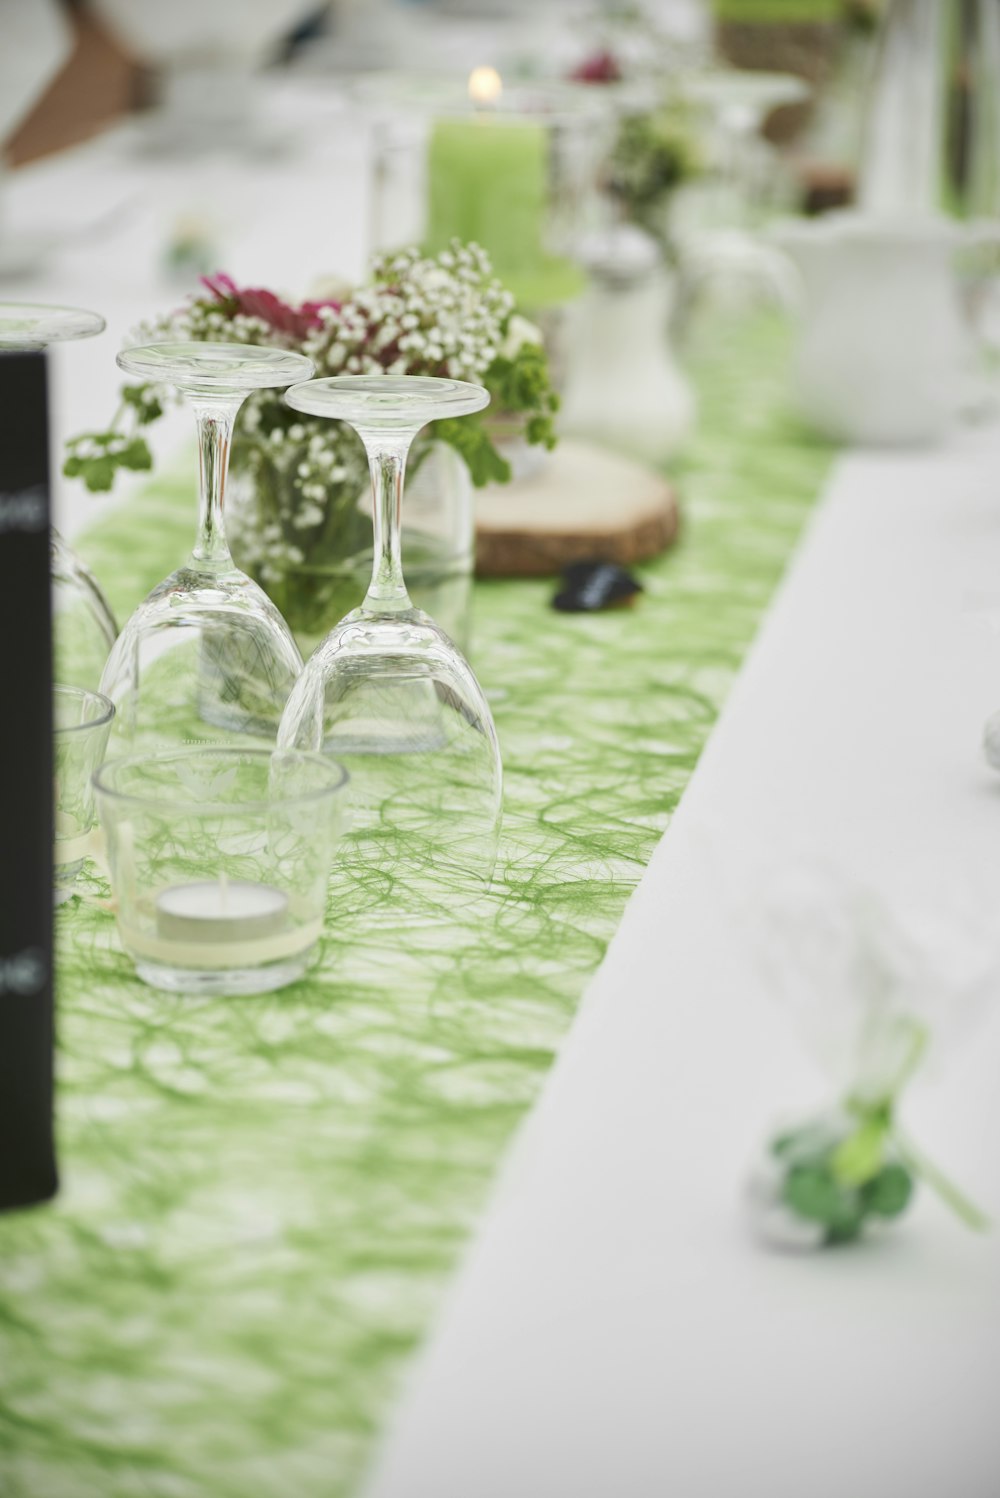 clear glass bottle beside clear glass vase on green table